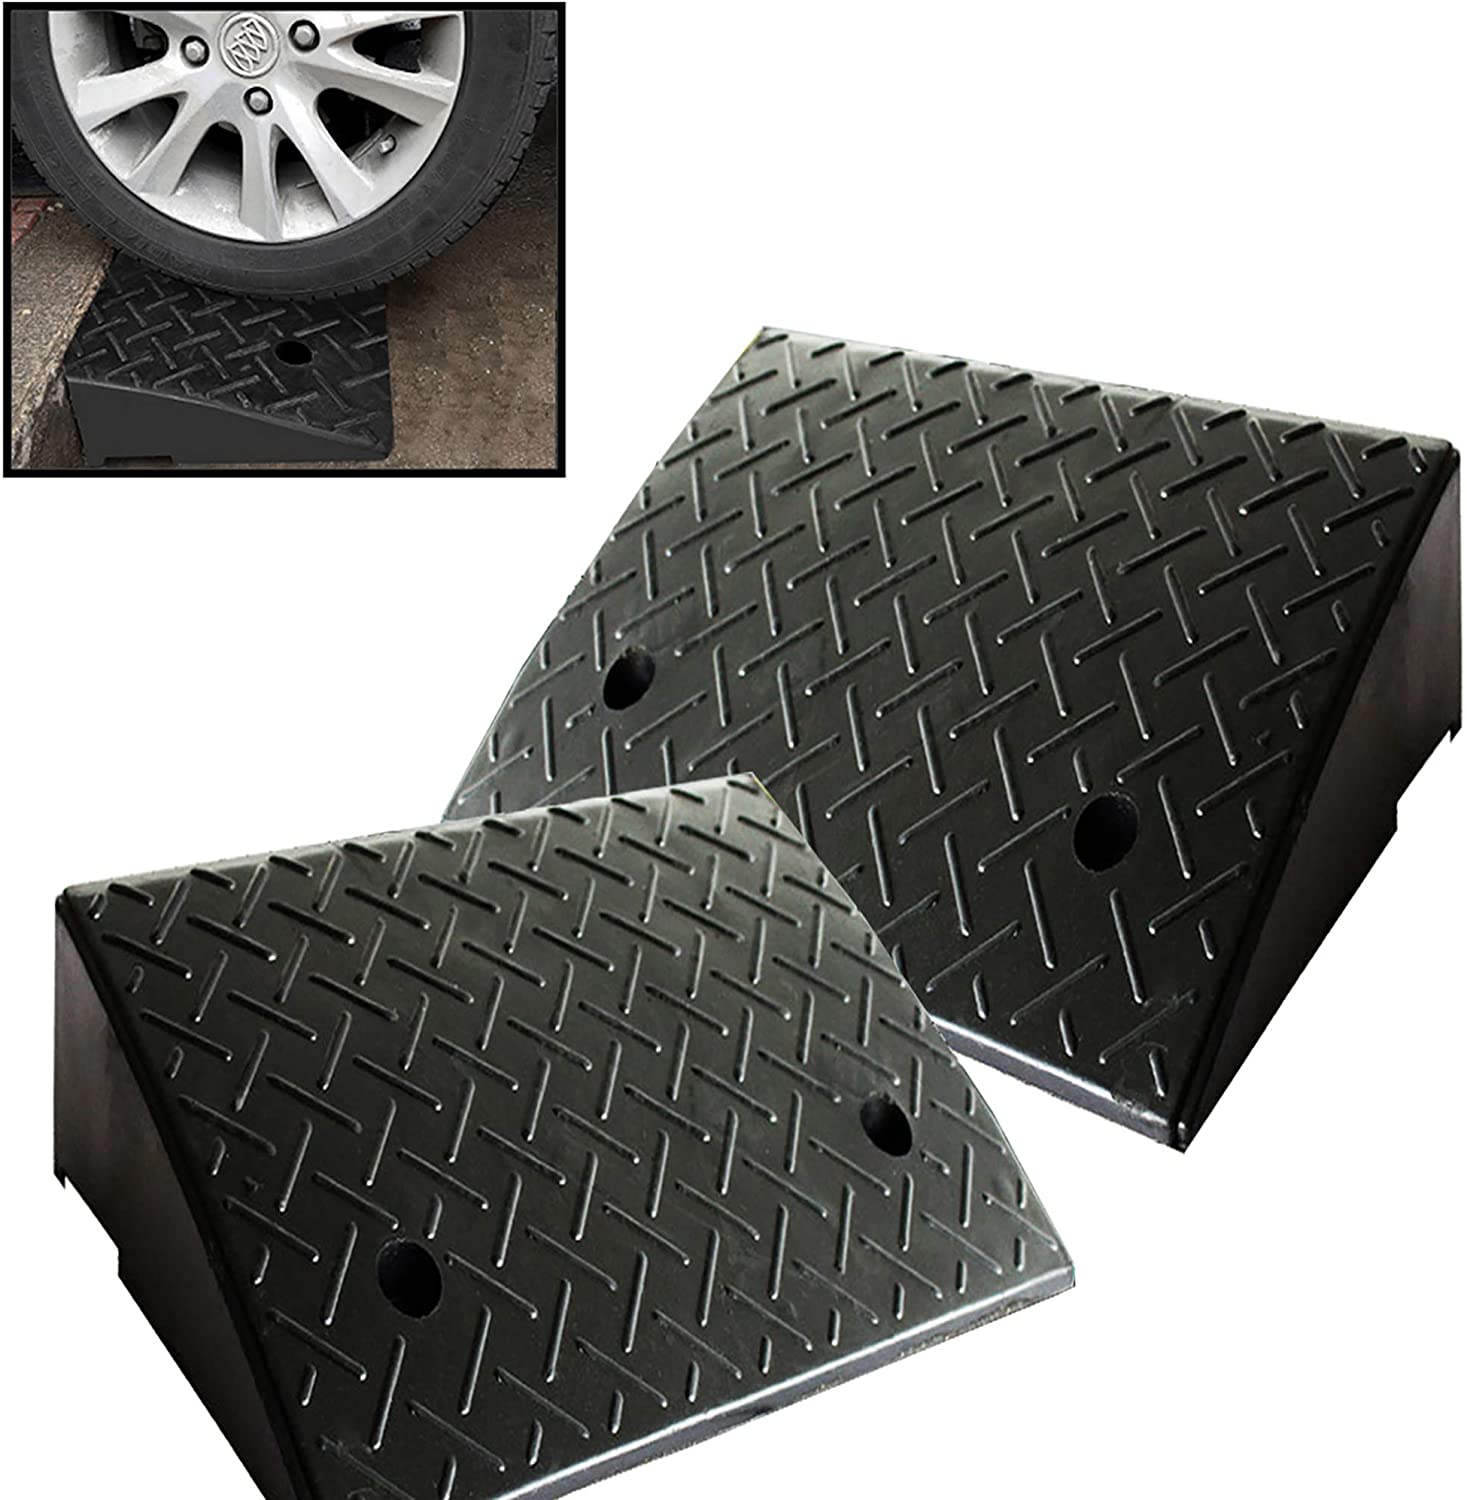 PIQU Curb Ramp Rubber Road Slopes Up The Climbing Aisle Along The Slope of The Road for Either Indoor or Outdoor use Color : Black, Size : 50x37x16cm